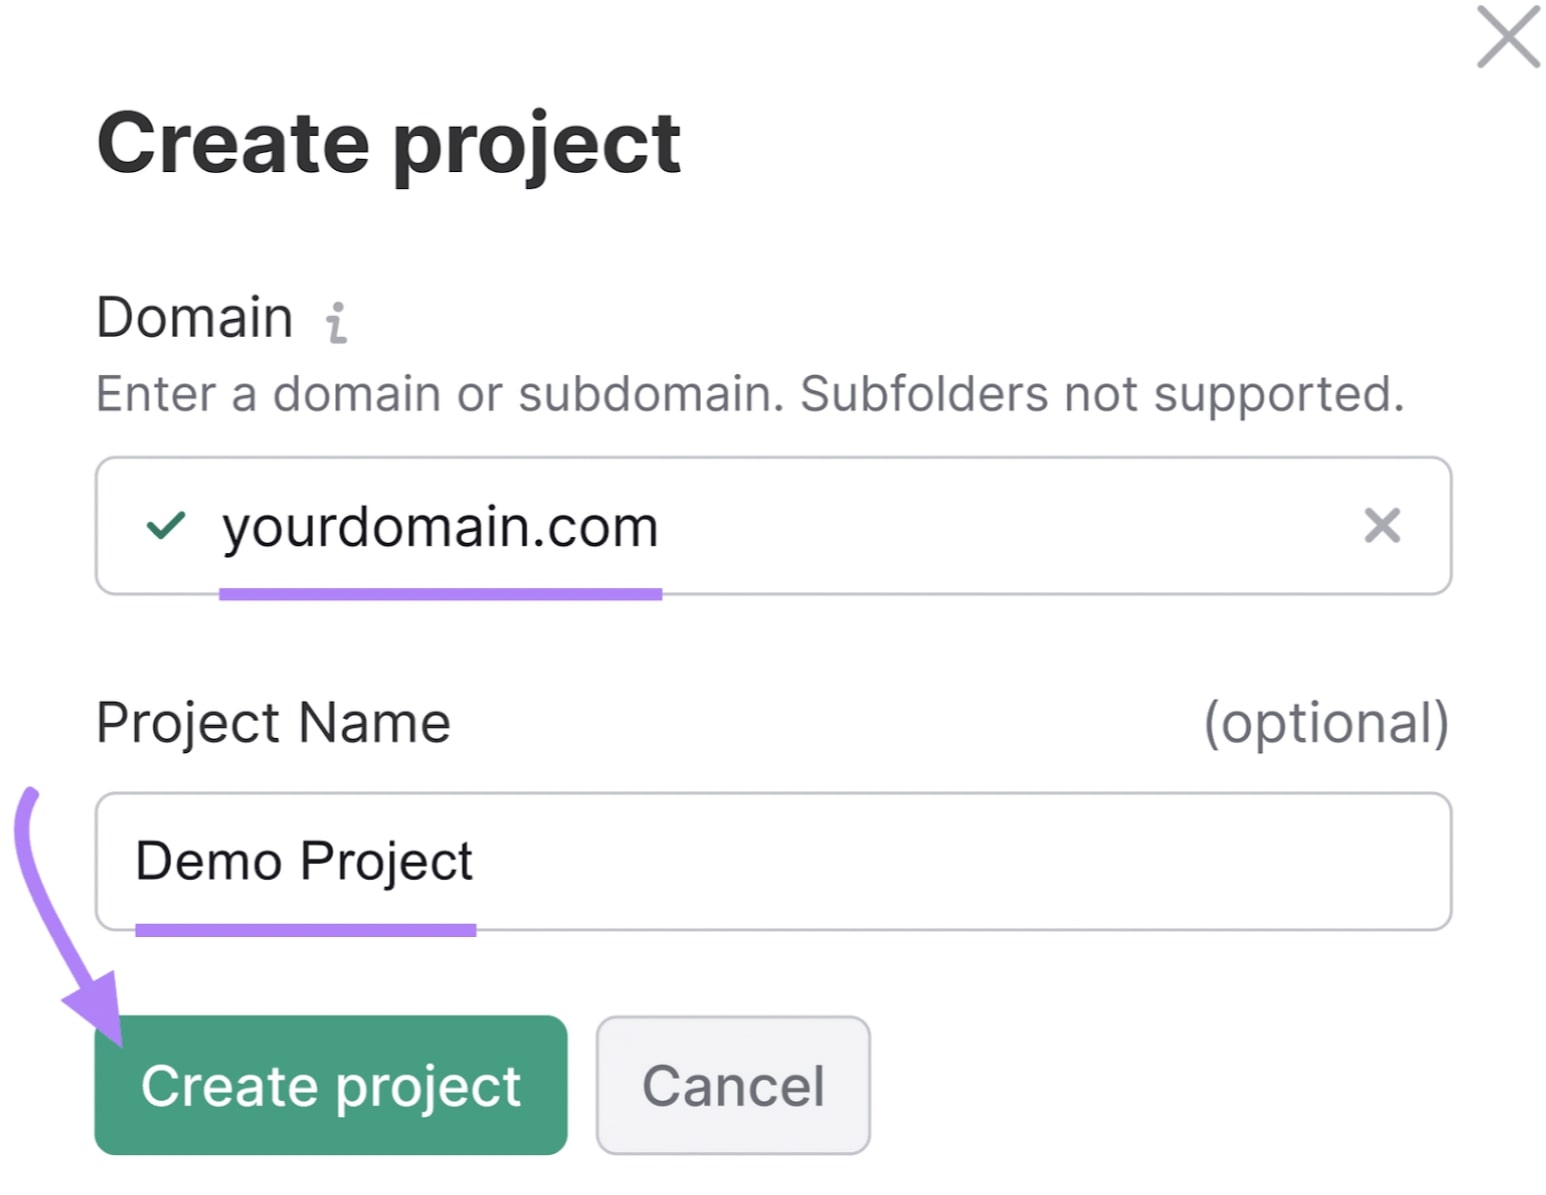 Creating a social toolkit project for yourdomain.com and naming it 'Demo Project'